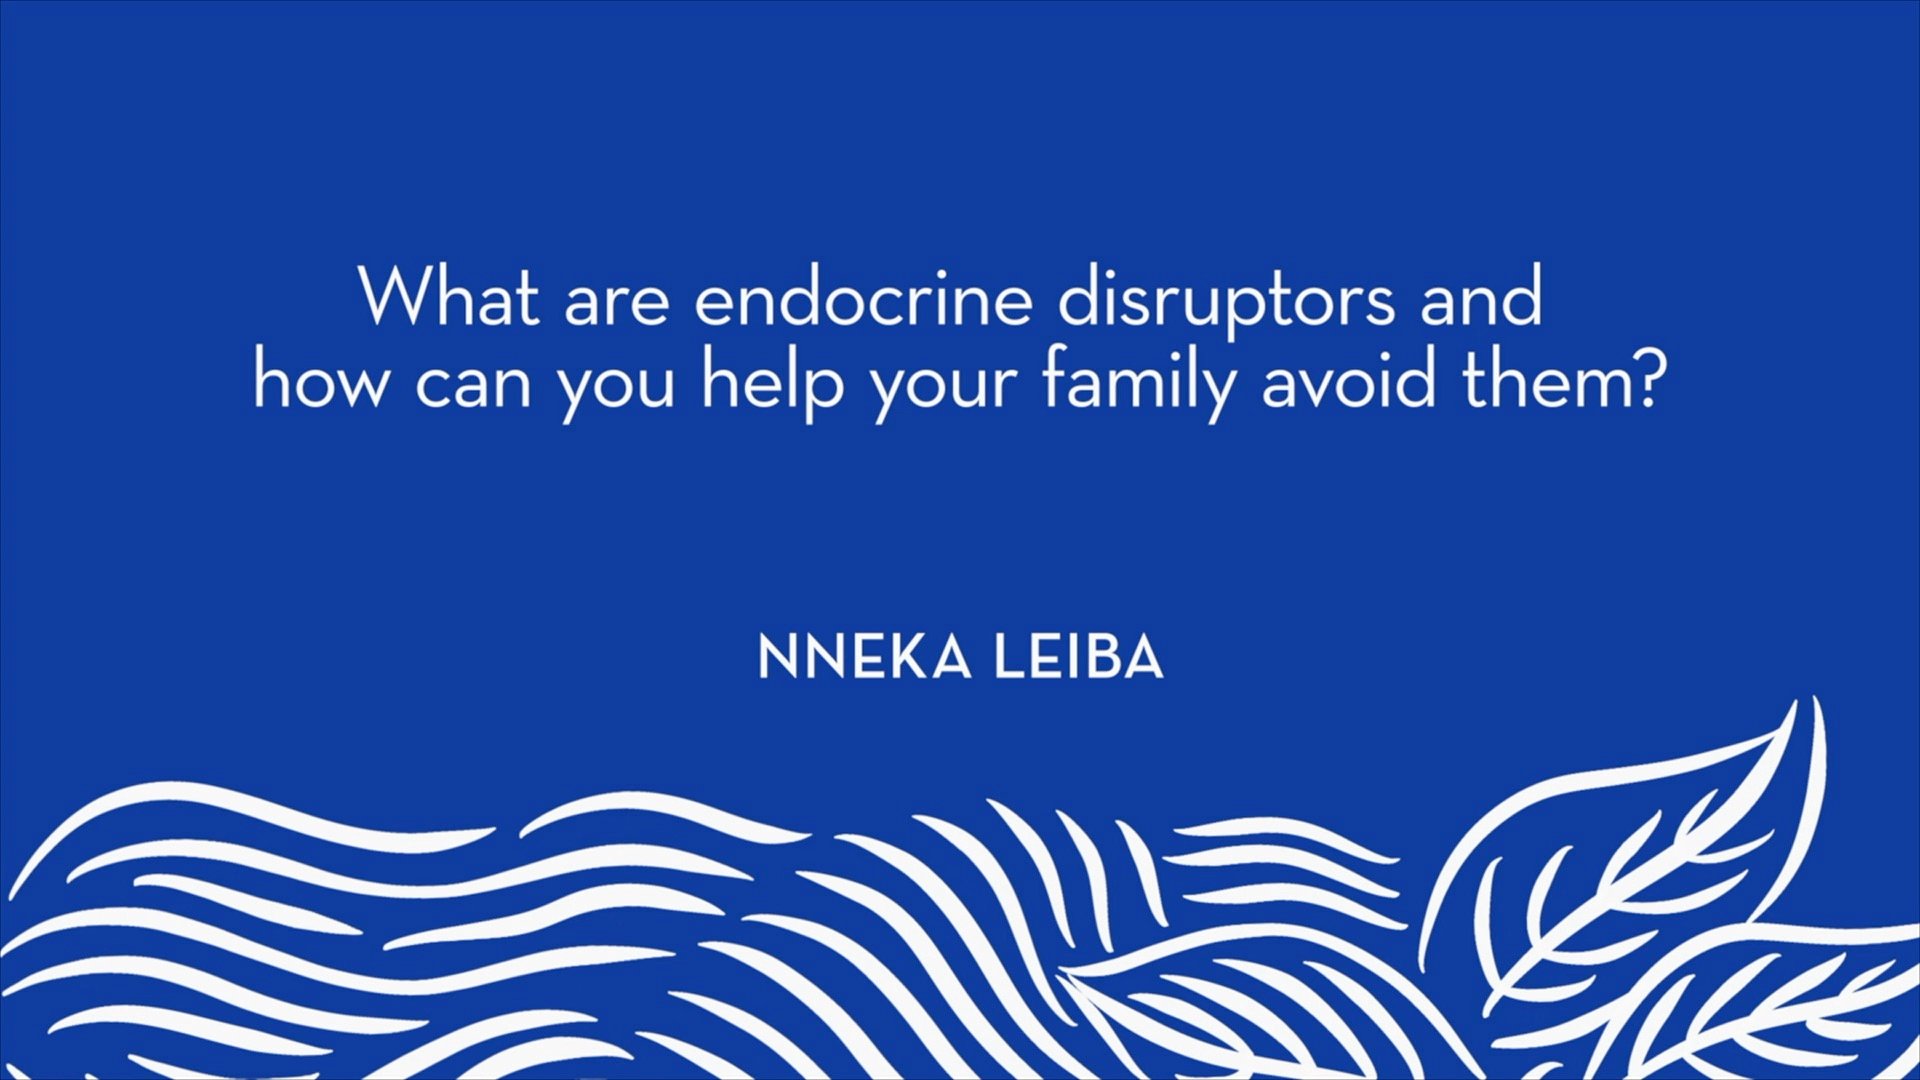 Nneka Leiba | What are endocrine disruptors and how can you help your family avoid them?